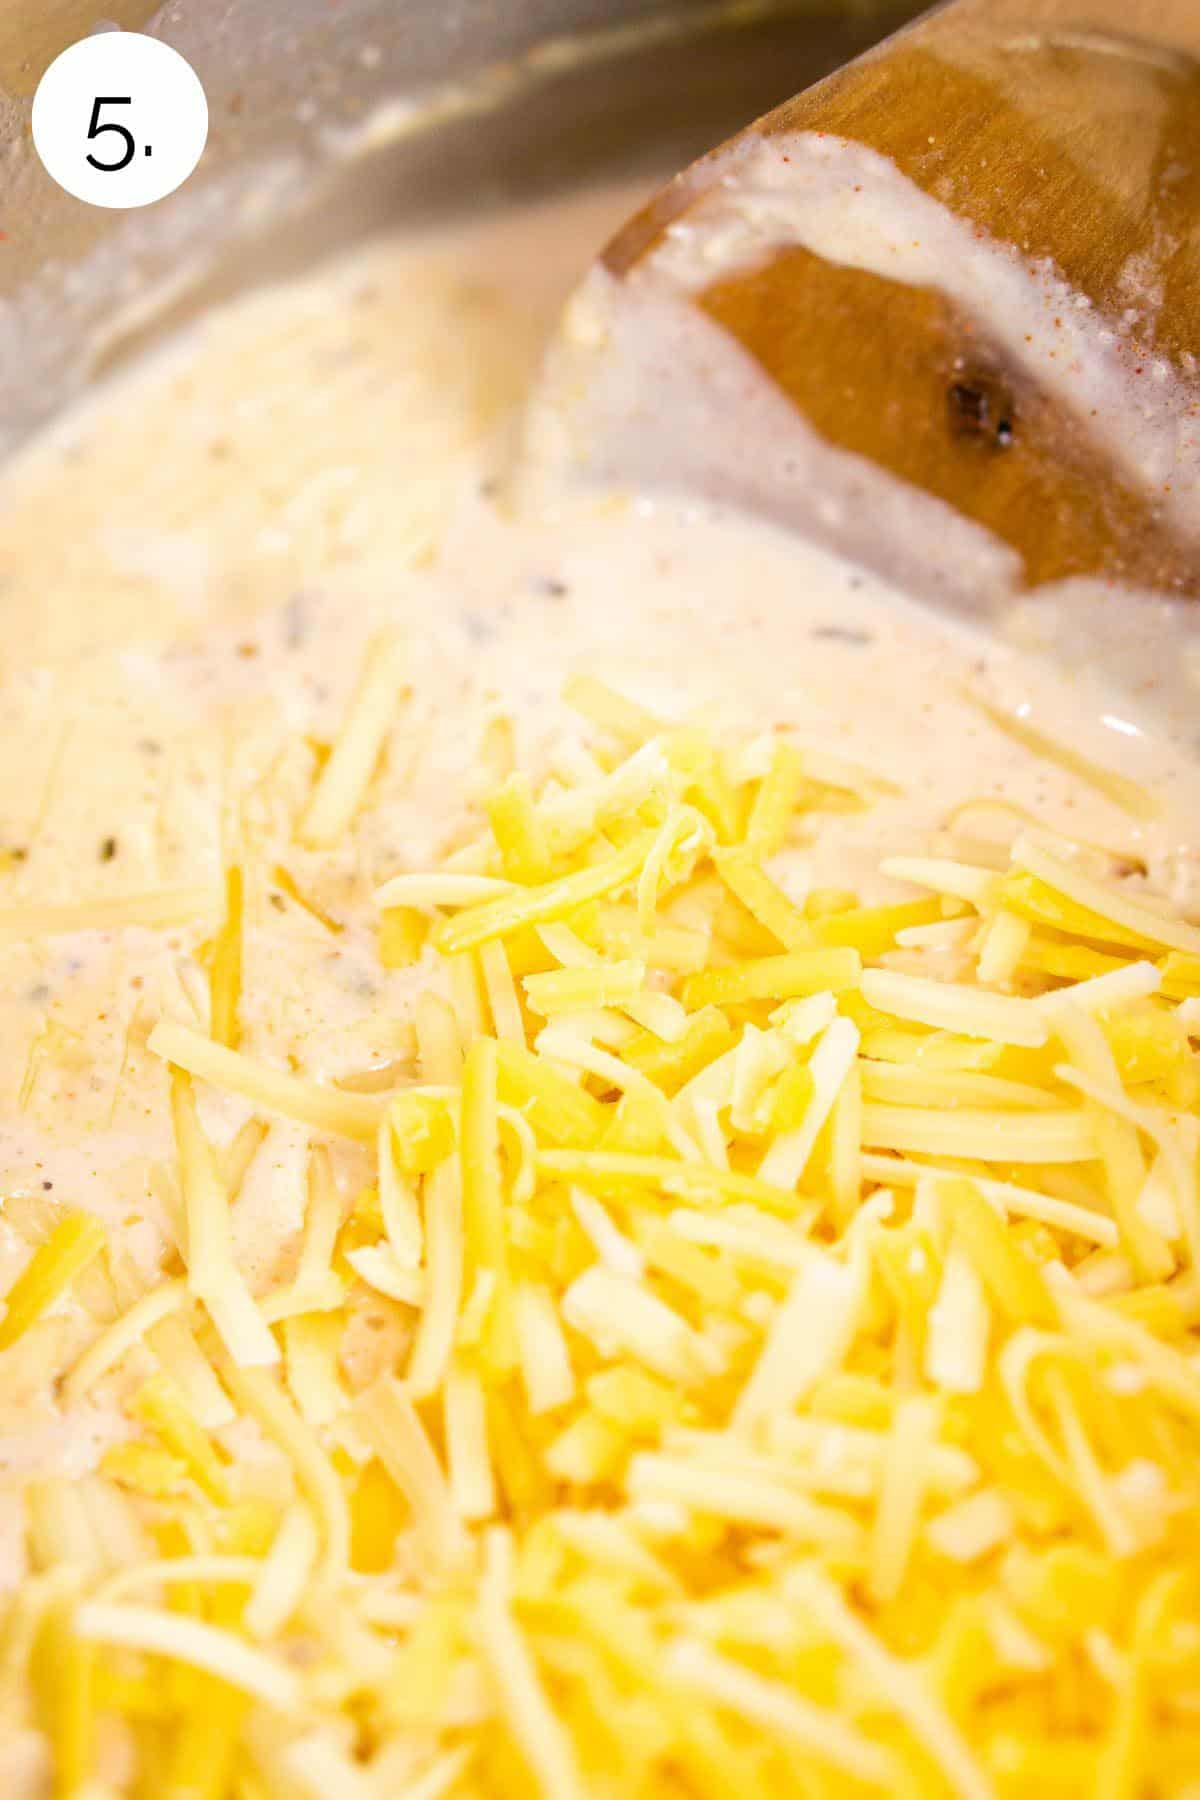 A wooden spoon stirring the shredded cheese into the cream mixture to make the sauce.